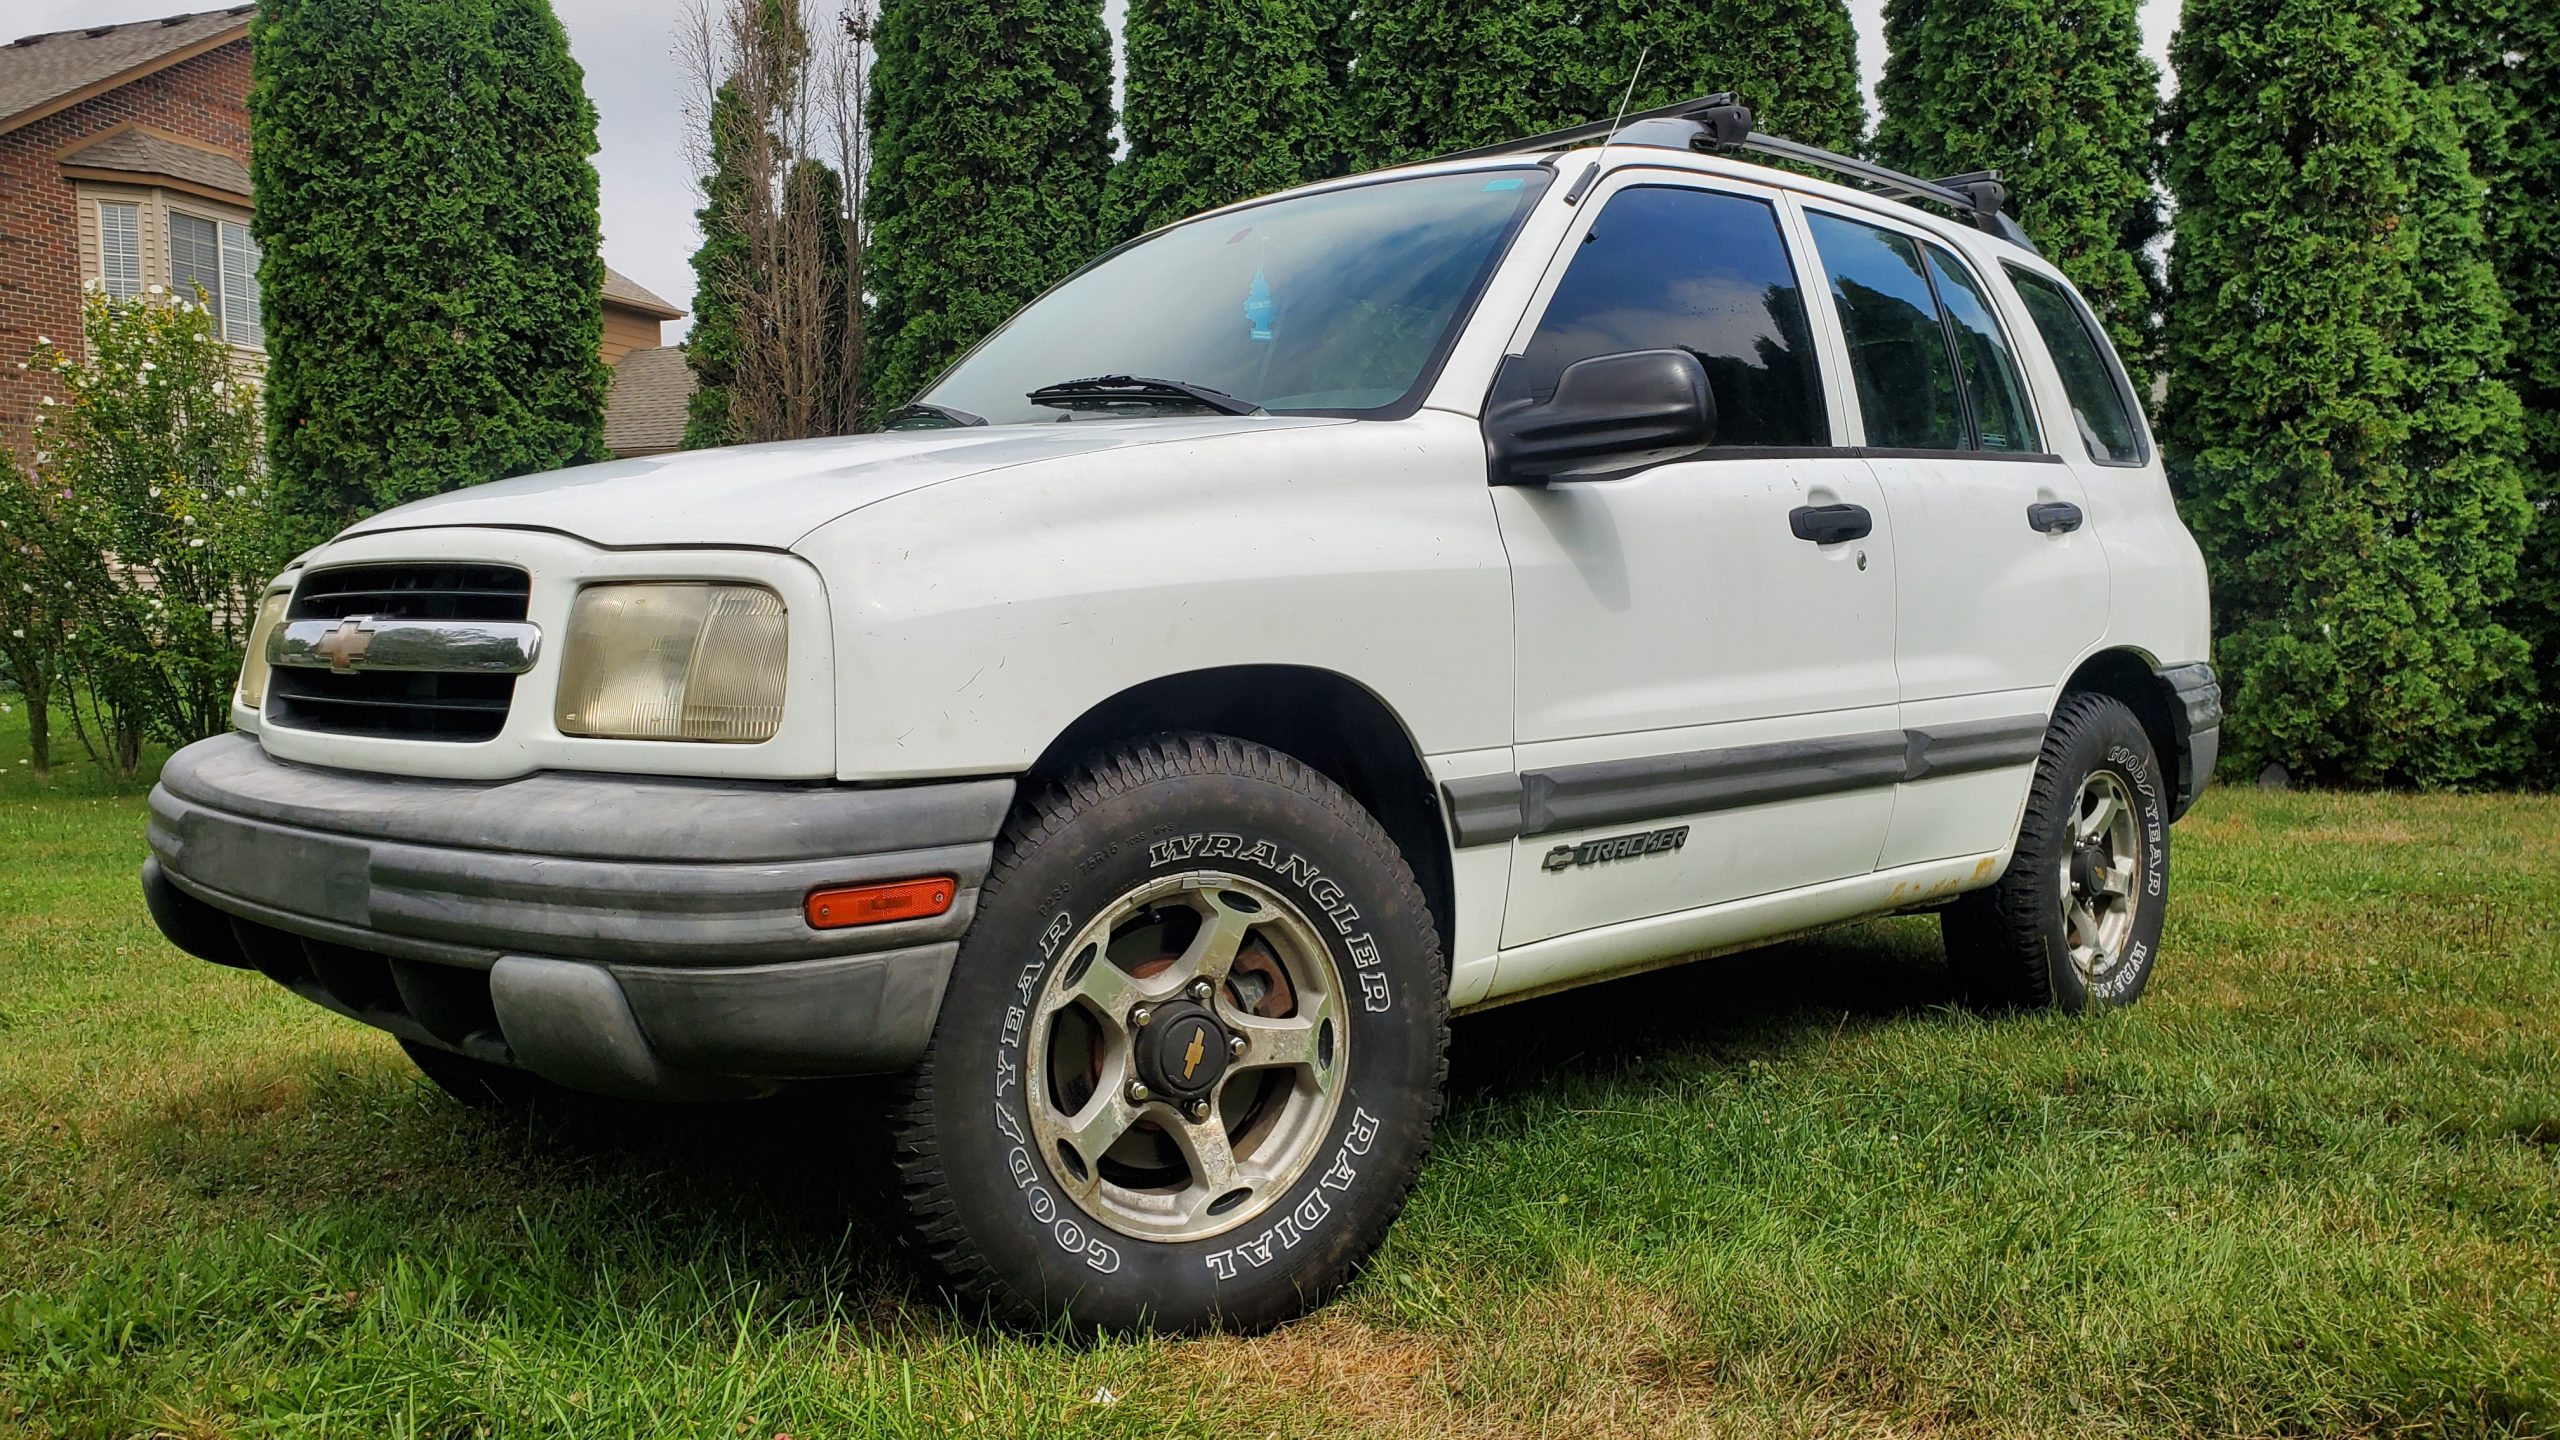 I Bought This Chevy Tracker For $700. Here's Why Fixing It Has Cost Over  Twice That - The Autopian